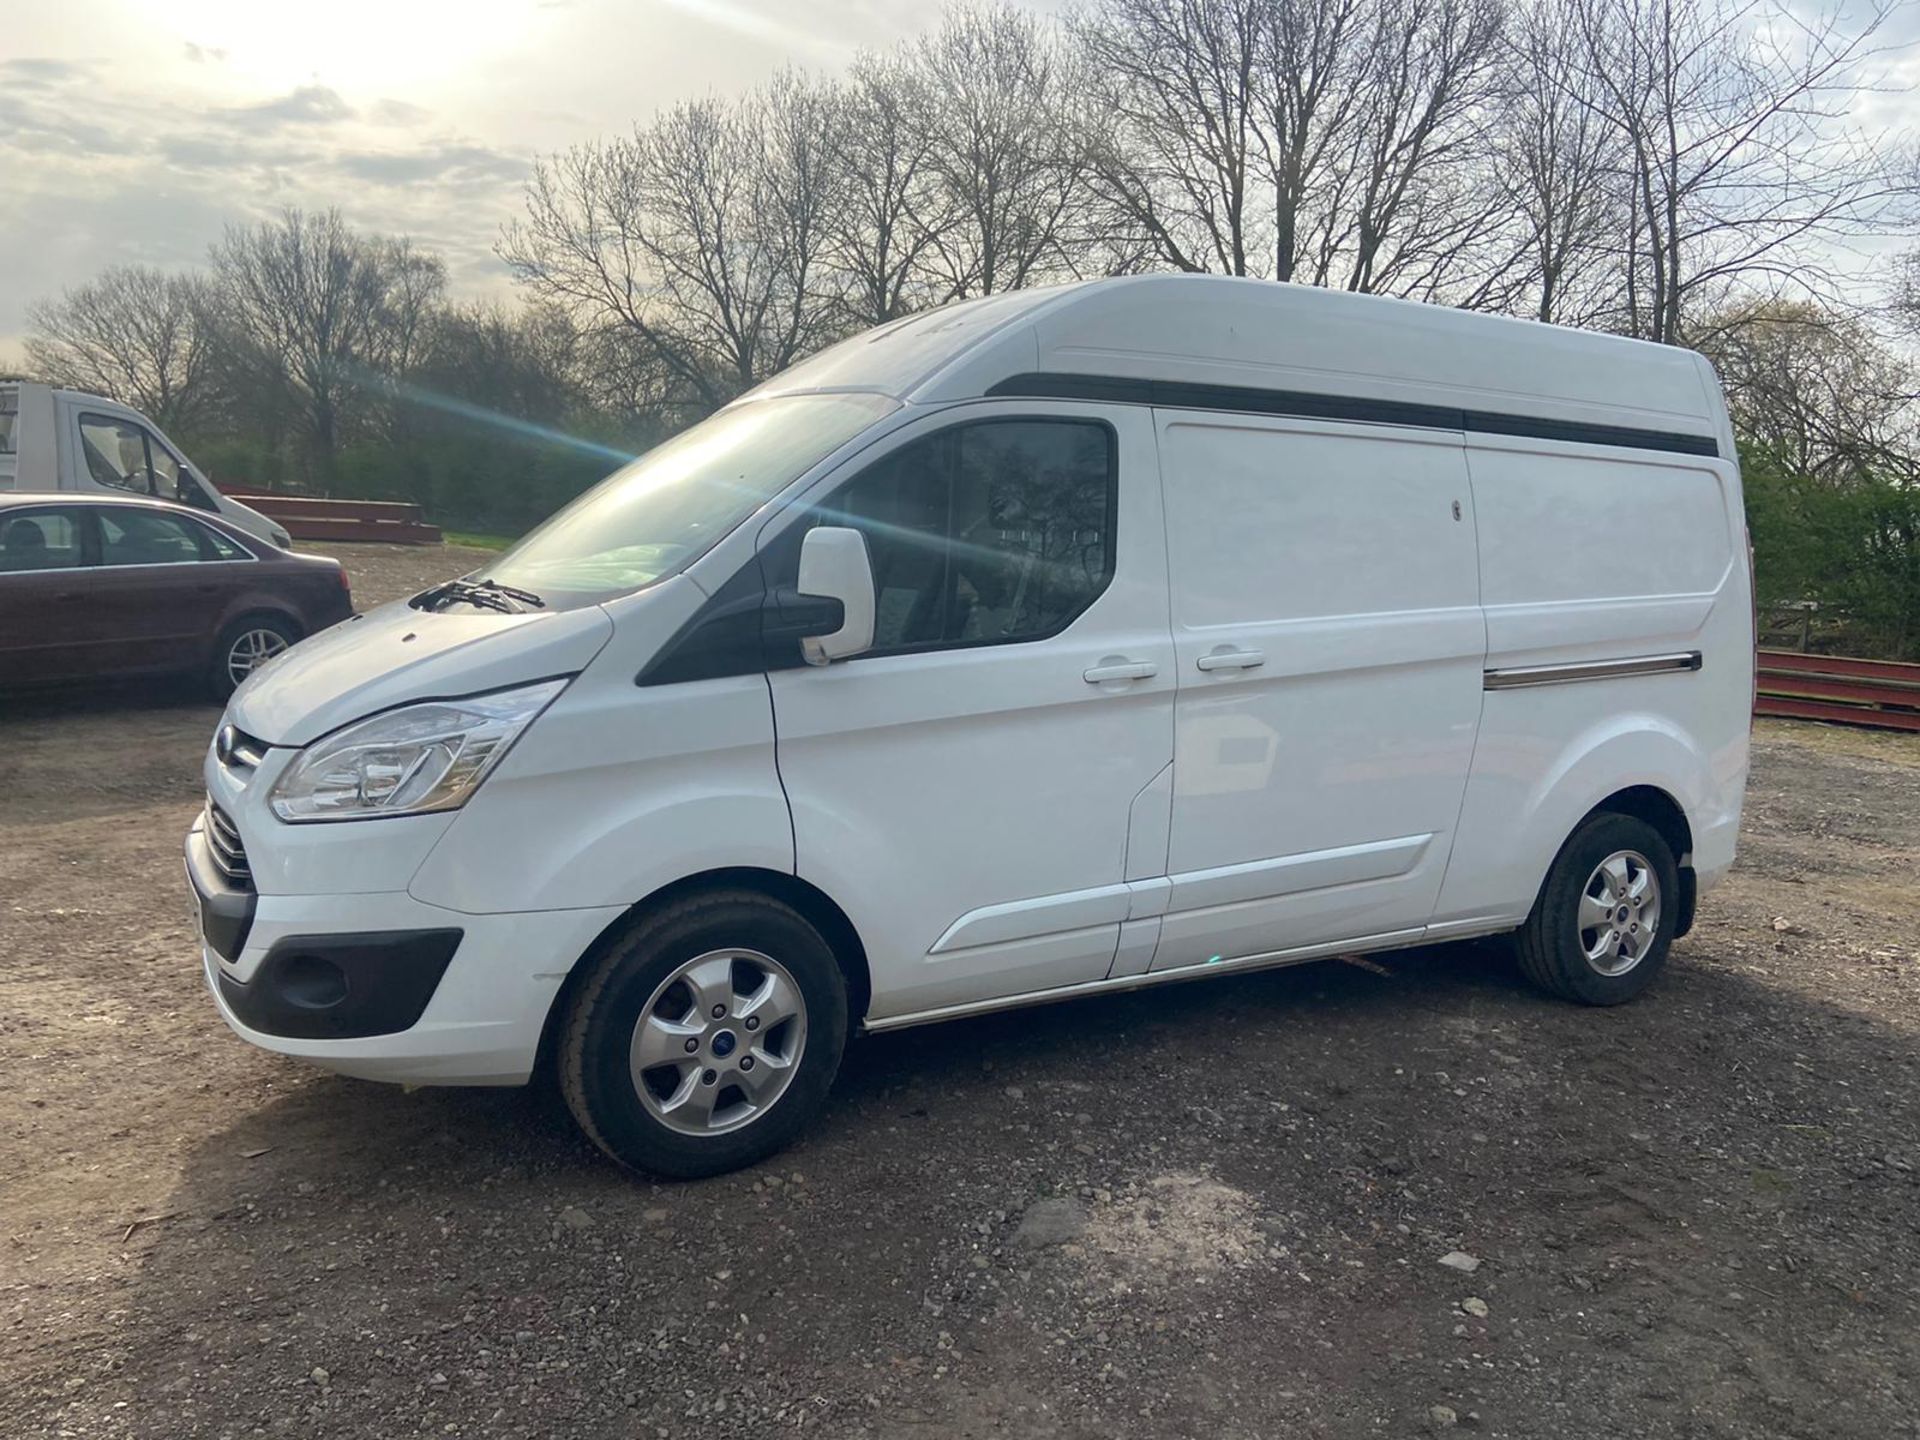 2017 (66) FORD TRANSIT CUSTOM 290 LIMITED, HEATED DRIVES SEATS, AIR CON *PLUS VAT* - Image 4 of 10